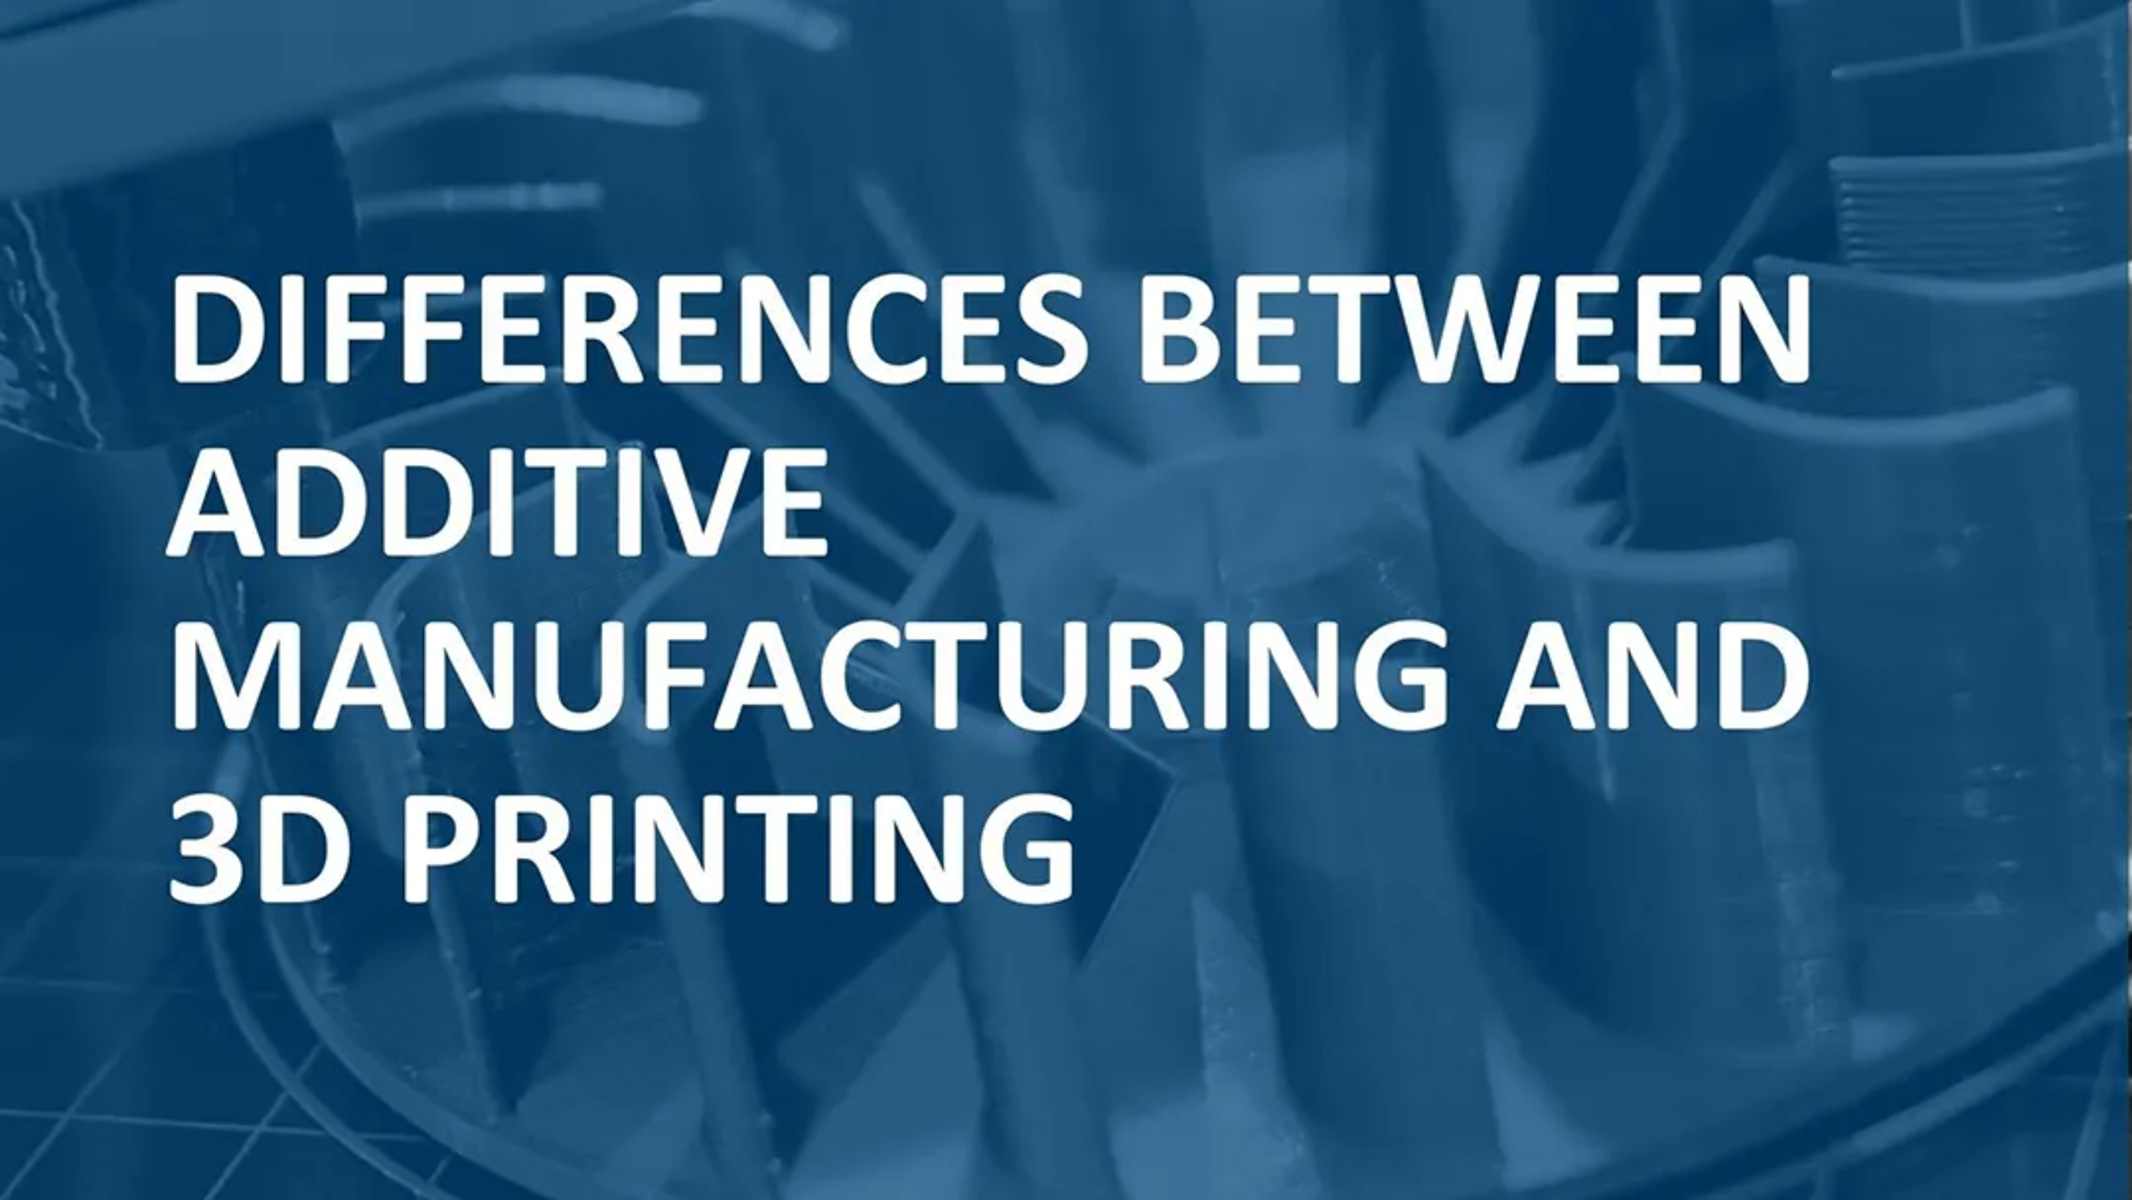 What Is The Difference Between 3D Printing And Additive Manufacturing